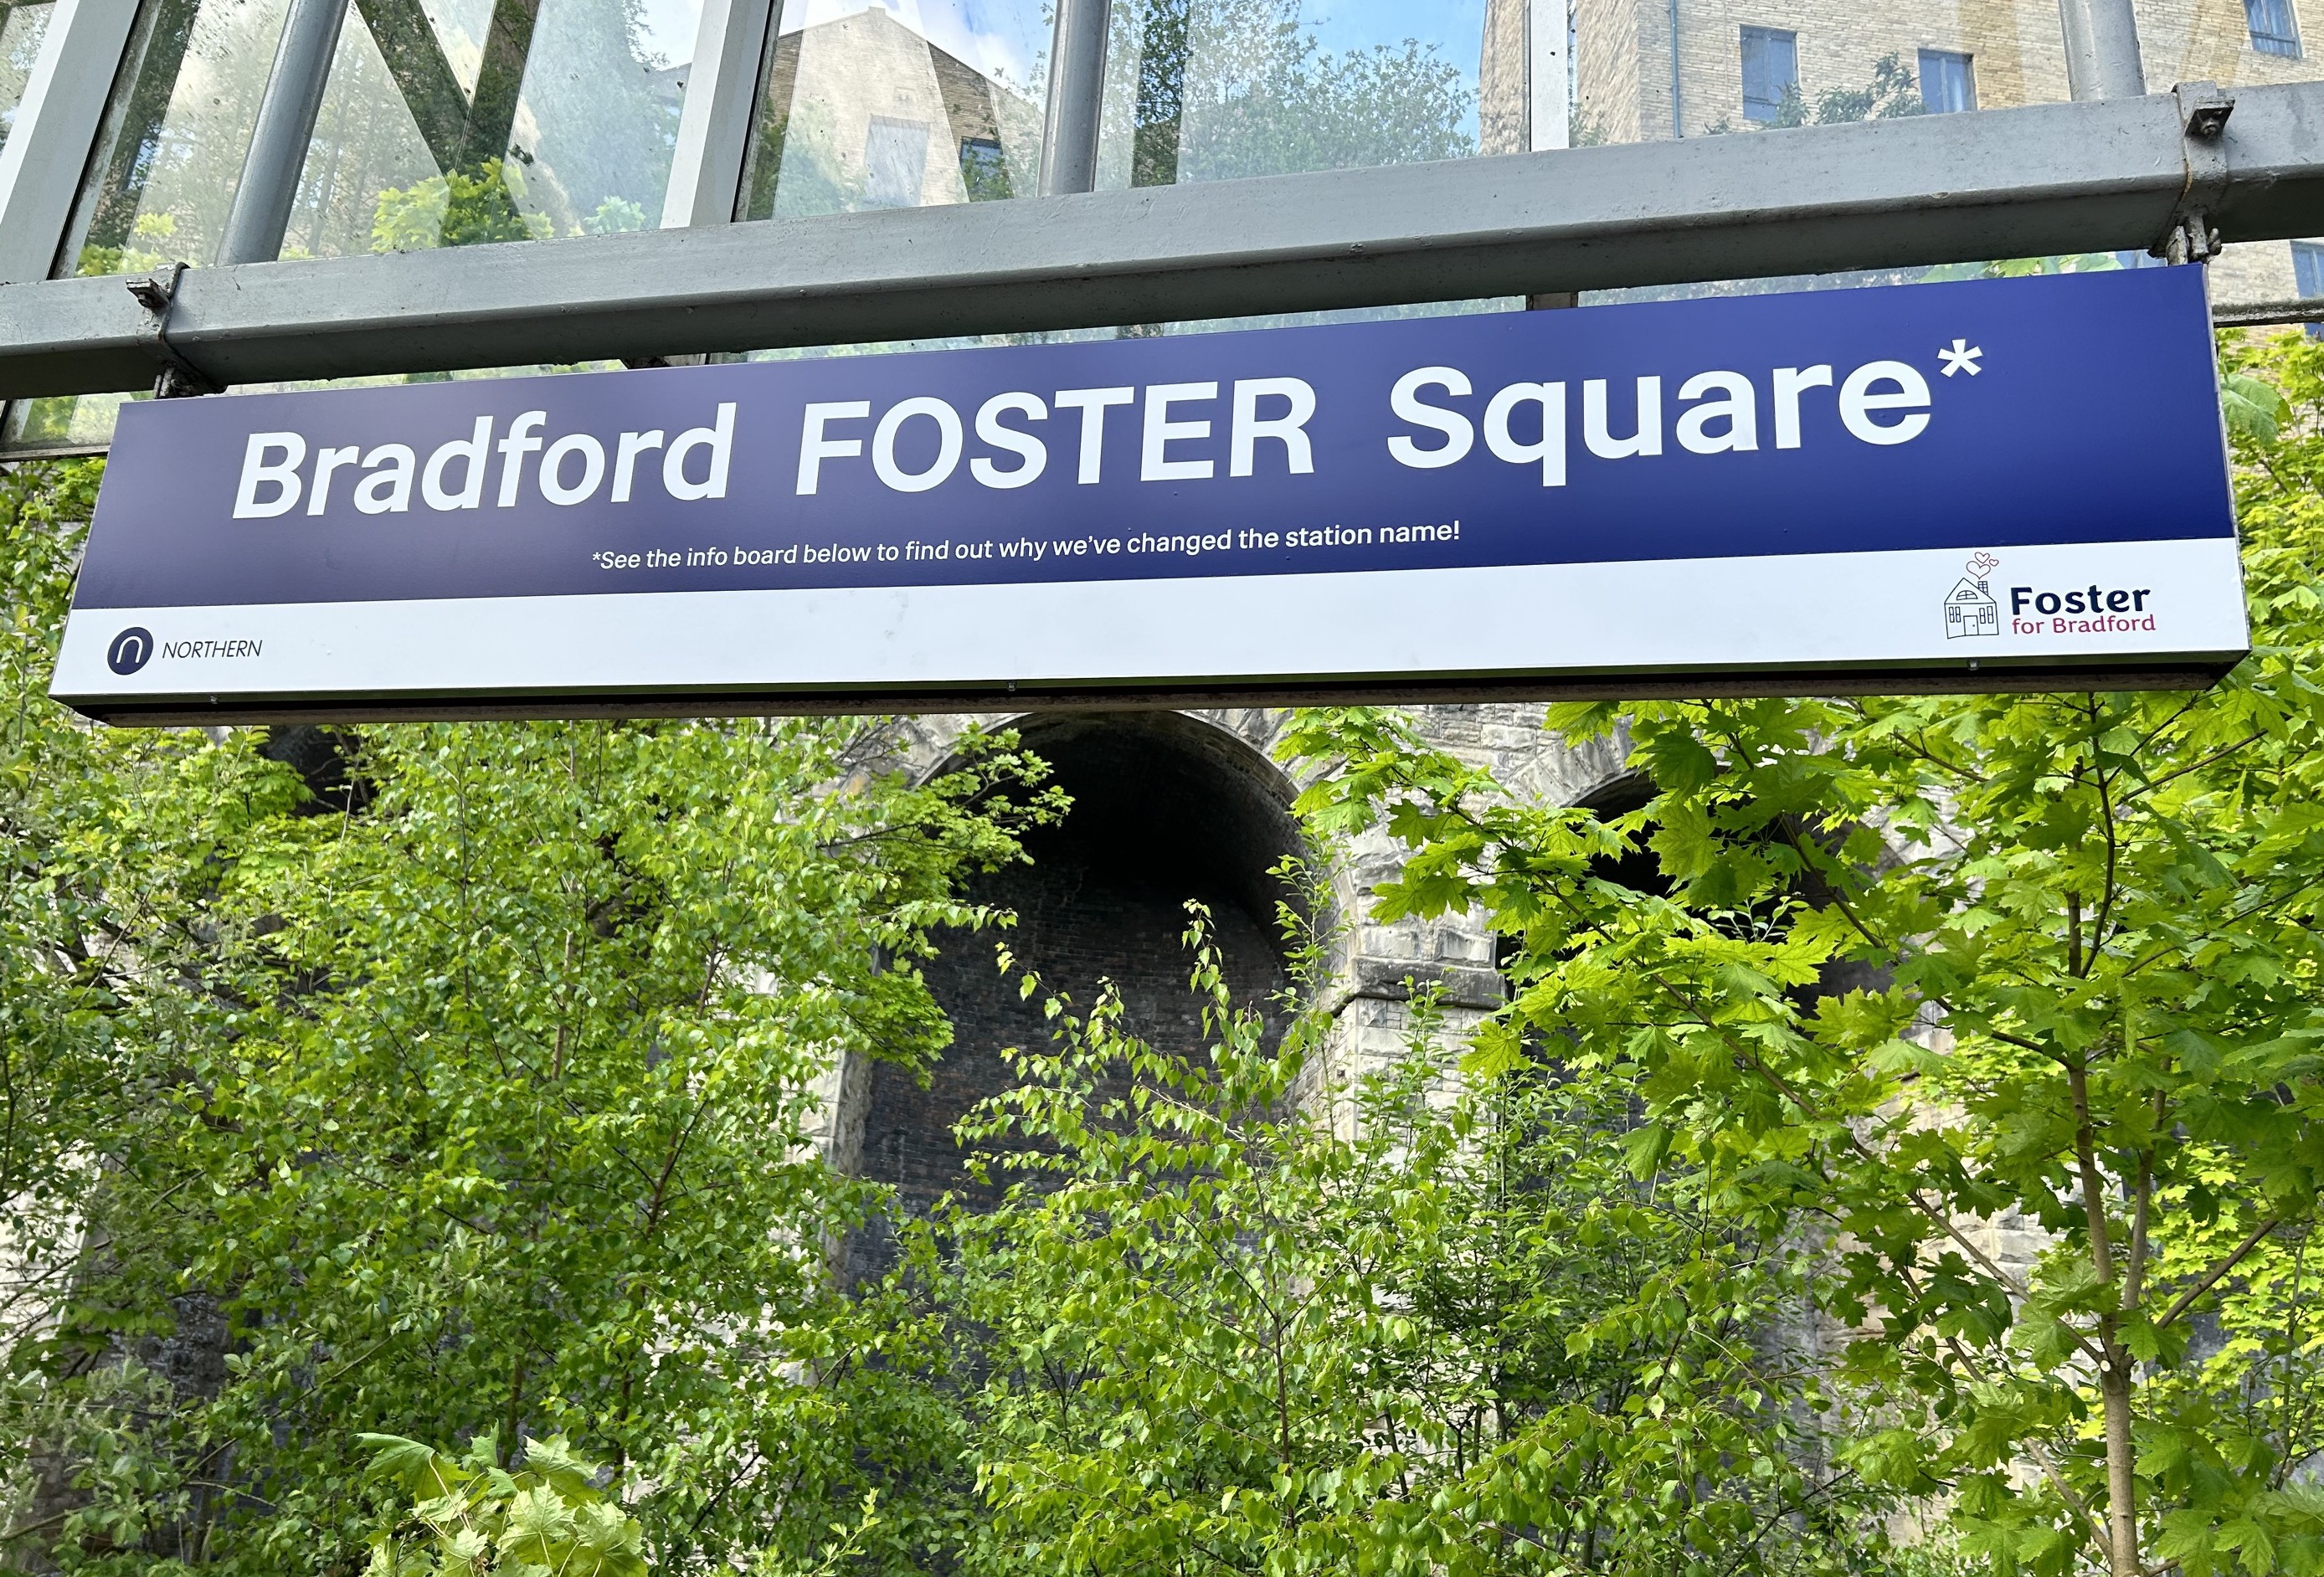 this-image-shows-the-temporary-signage-change-from-bradfor-forster-square-to-bradford-foster-square-2-2